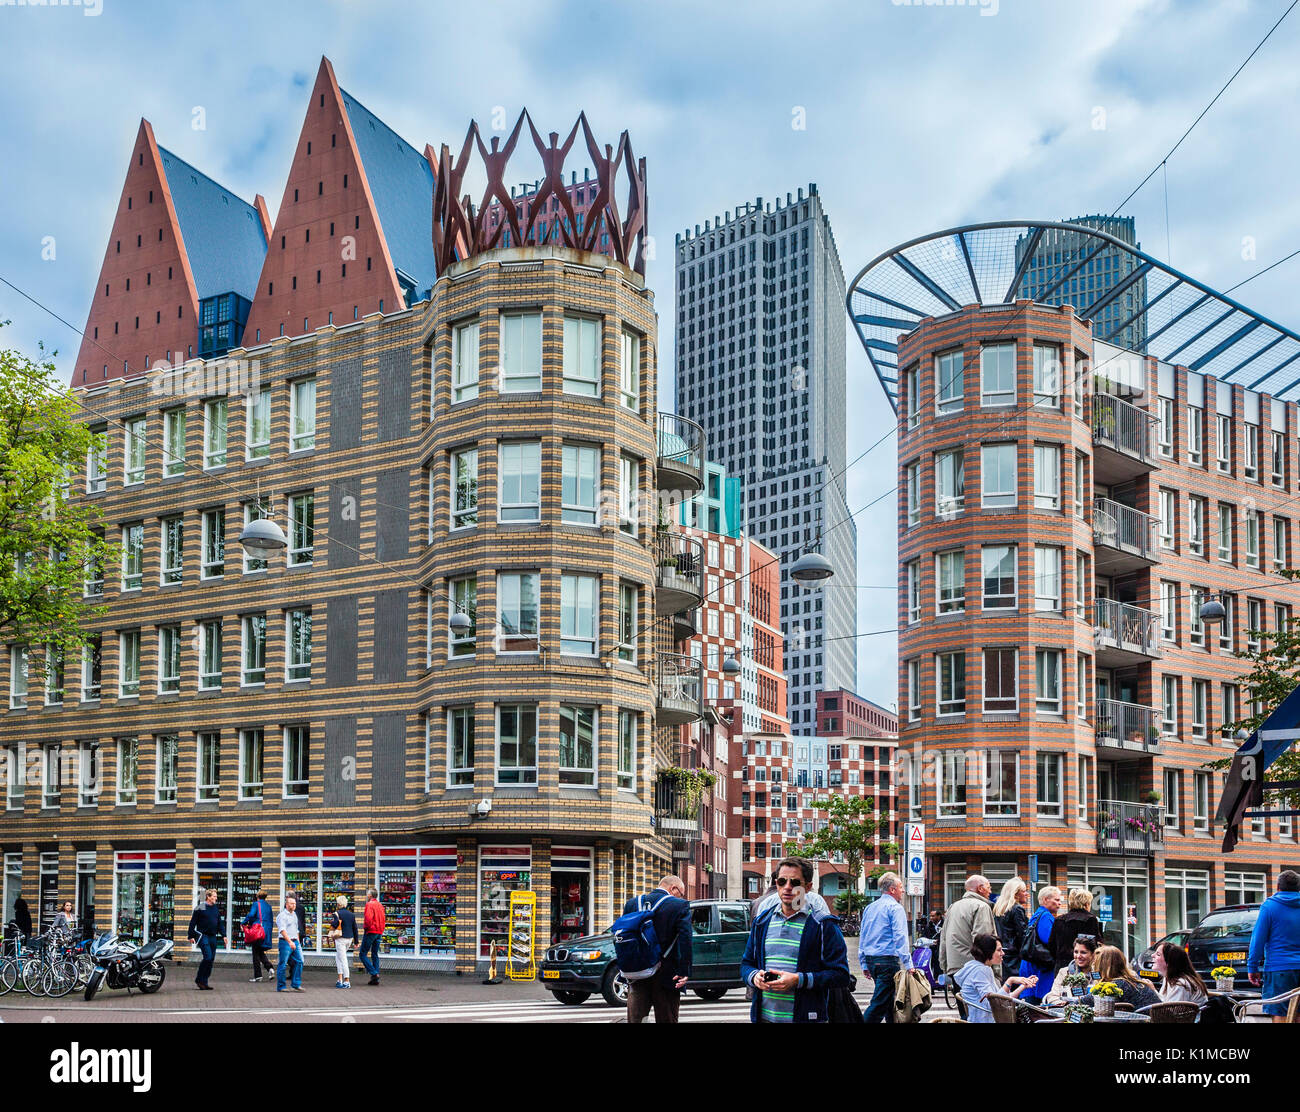 Netherlands, South Holland, The Hague (Den Haag),  large scale urban development, view of Calliopestraat, seen from Herengracht and Fluwelen Burgwal,  Stock Photo